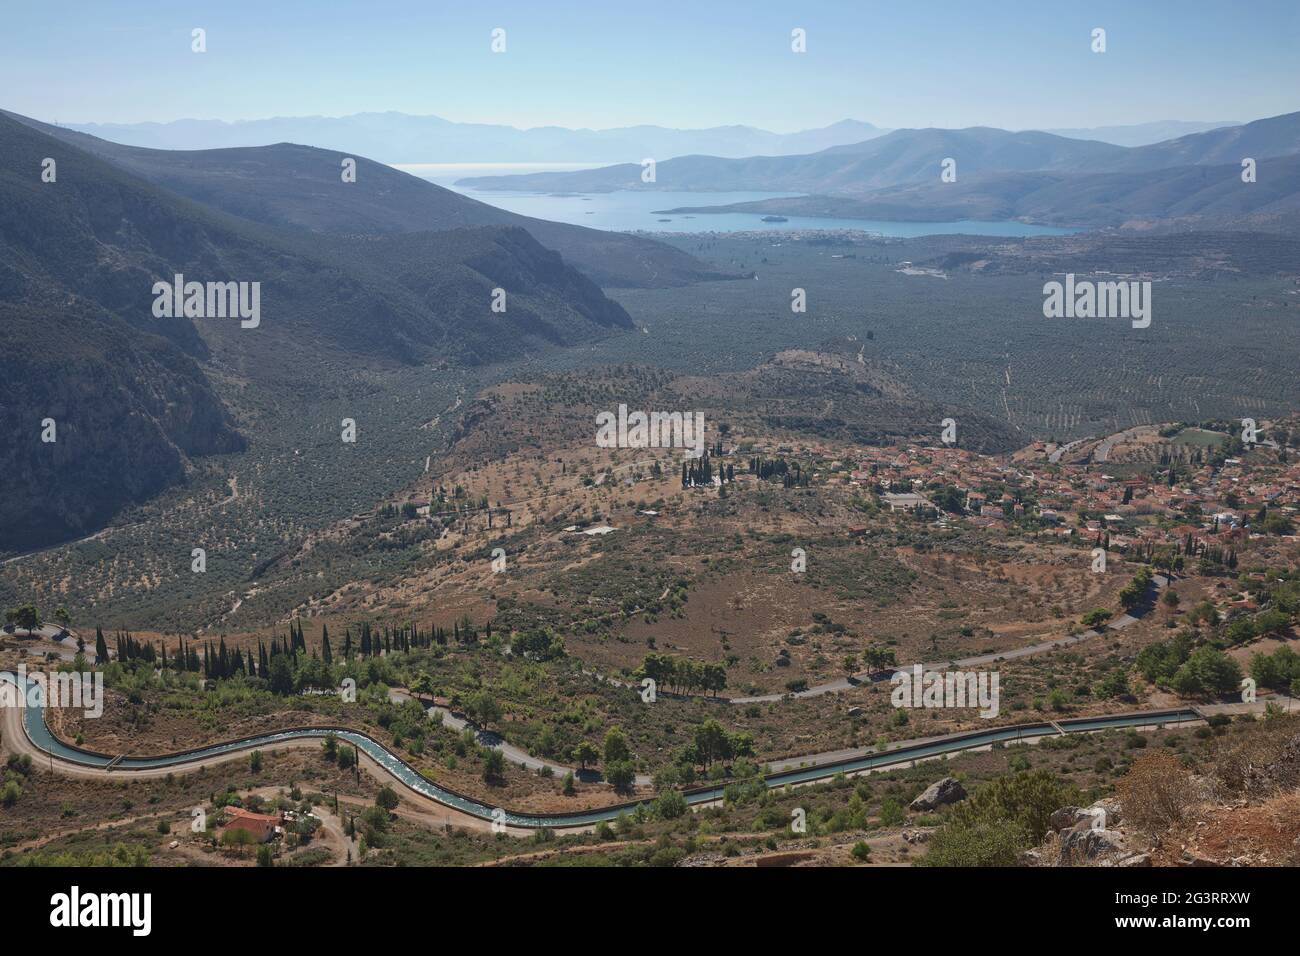 Archaelogical site of Delphi, Greece. Delphi is ancient sanctuary that grew rich as seat of oracle Stock Photo